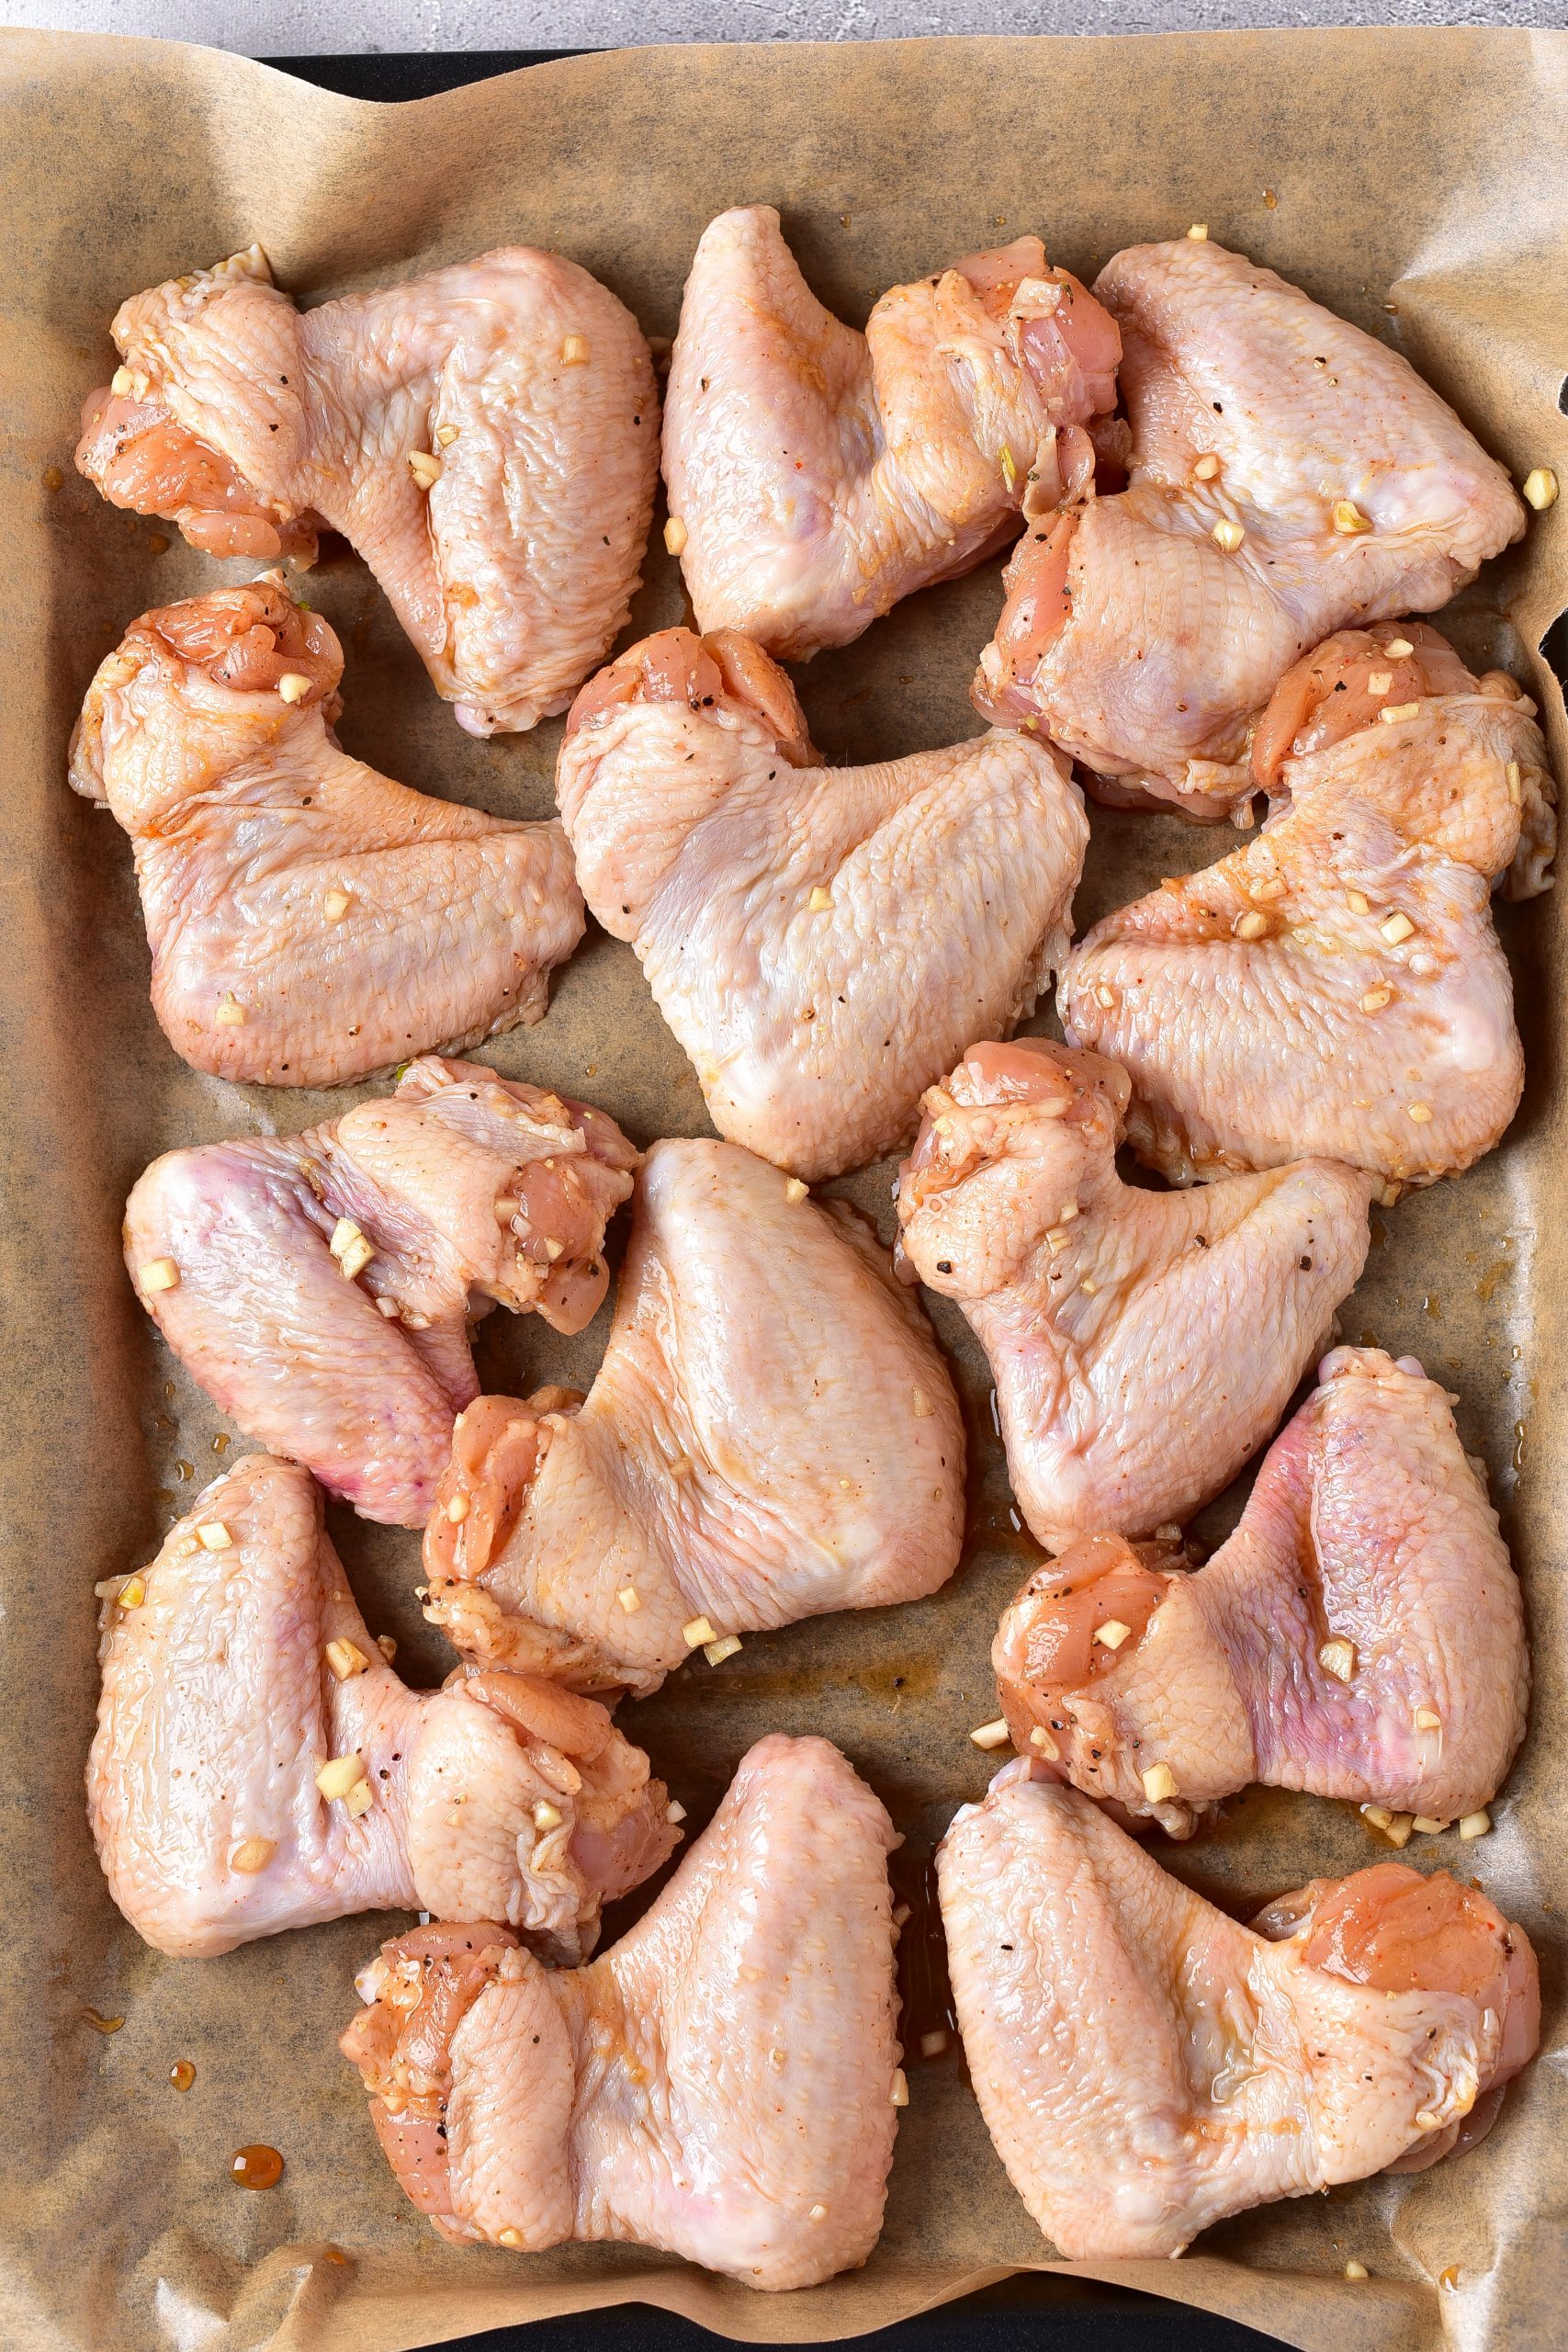 Layer the wings on the baking sheet, and bake for 25-30 minutes, or until completely cooked through. 